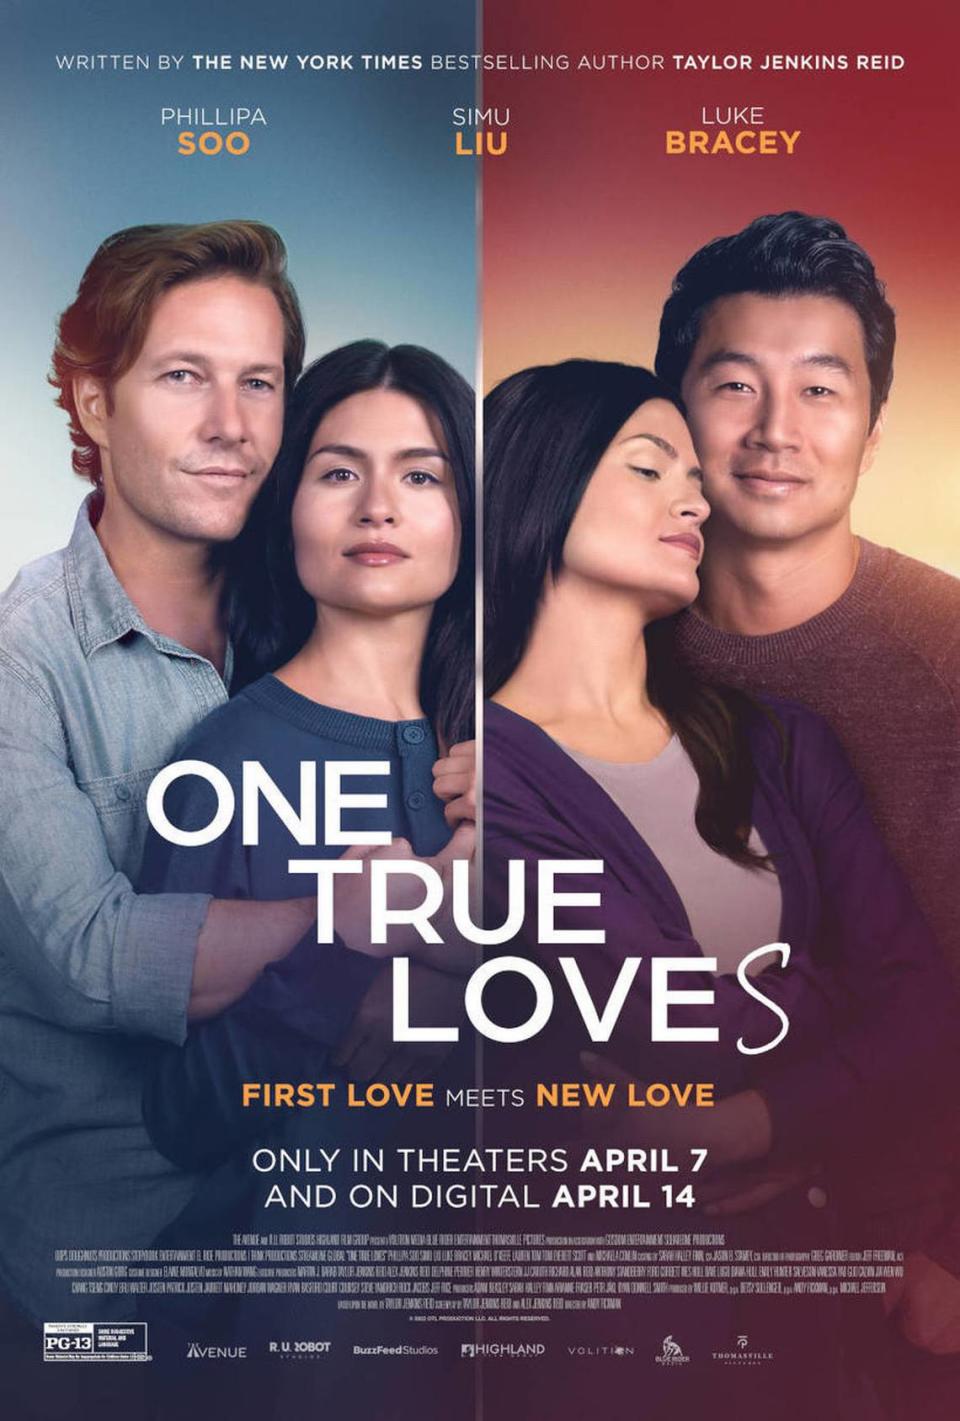 “One True Loves,” based on the 2016 Taylor Jenkins Reid novel of the same name, premieres in theaters April 7. The movie was filmed in North Carolina.